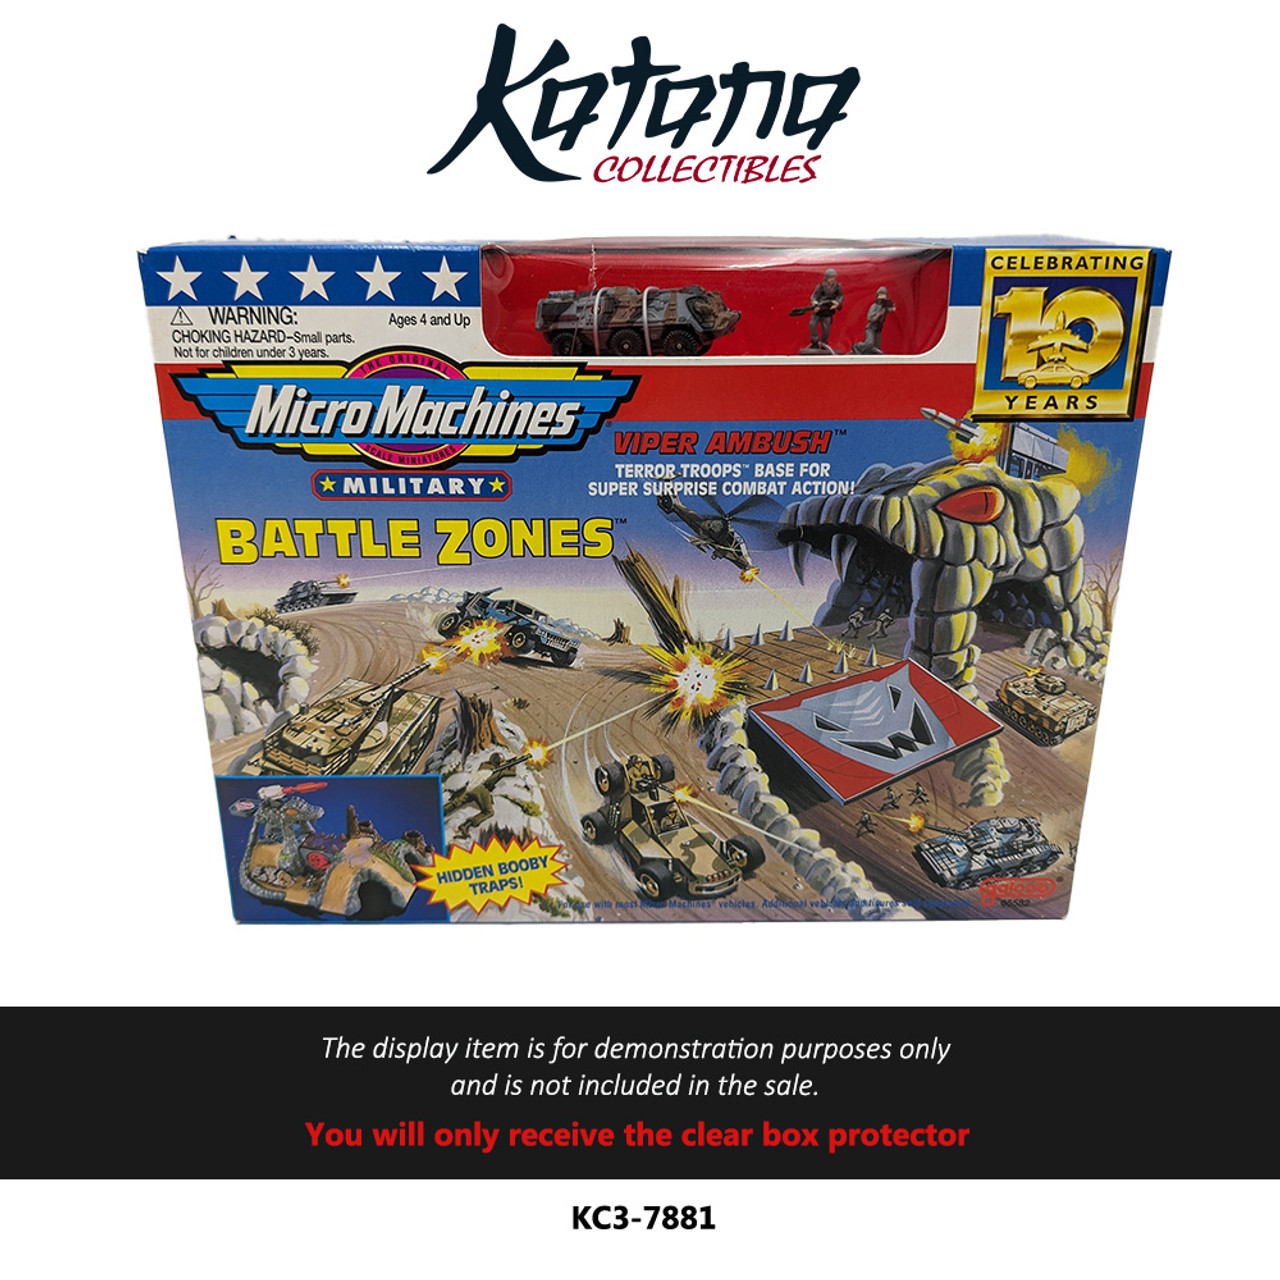 Katana Collectibles Protector For 1996 Micro Machines Military Battle Zones Playset (windowed box)